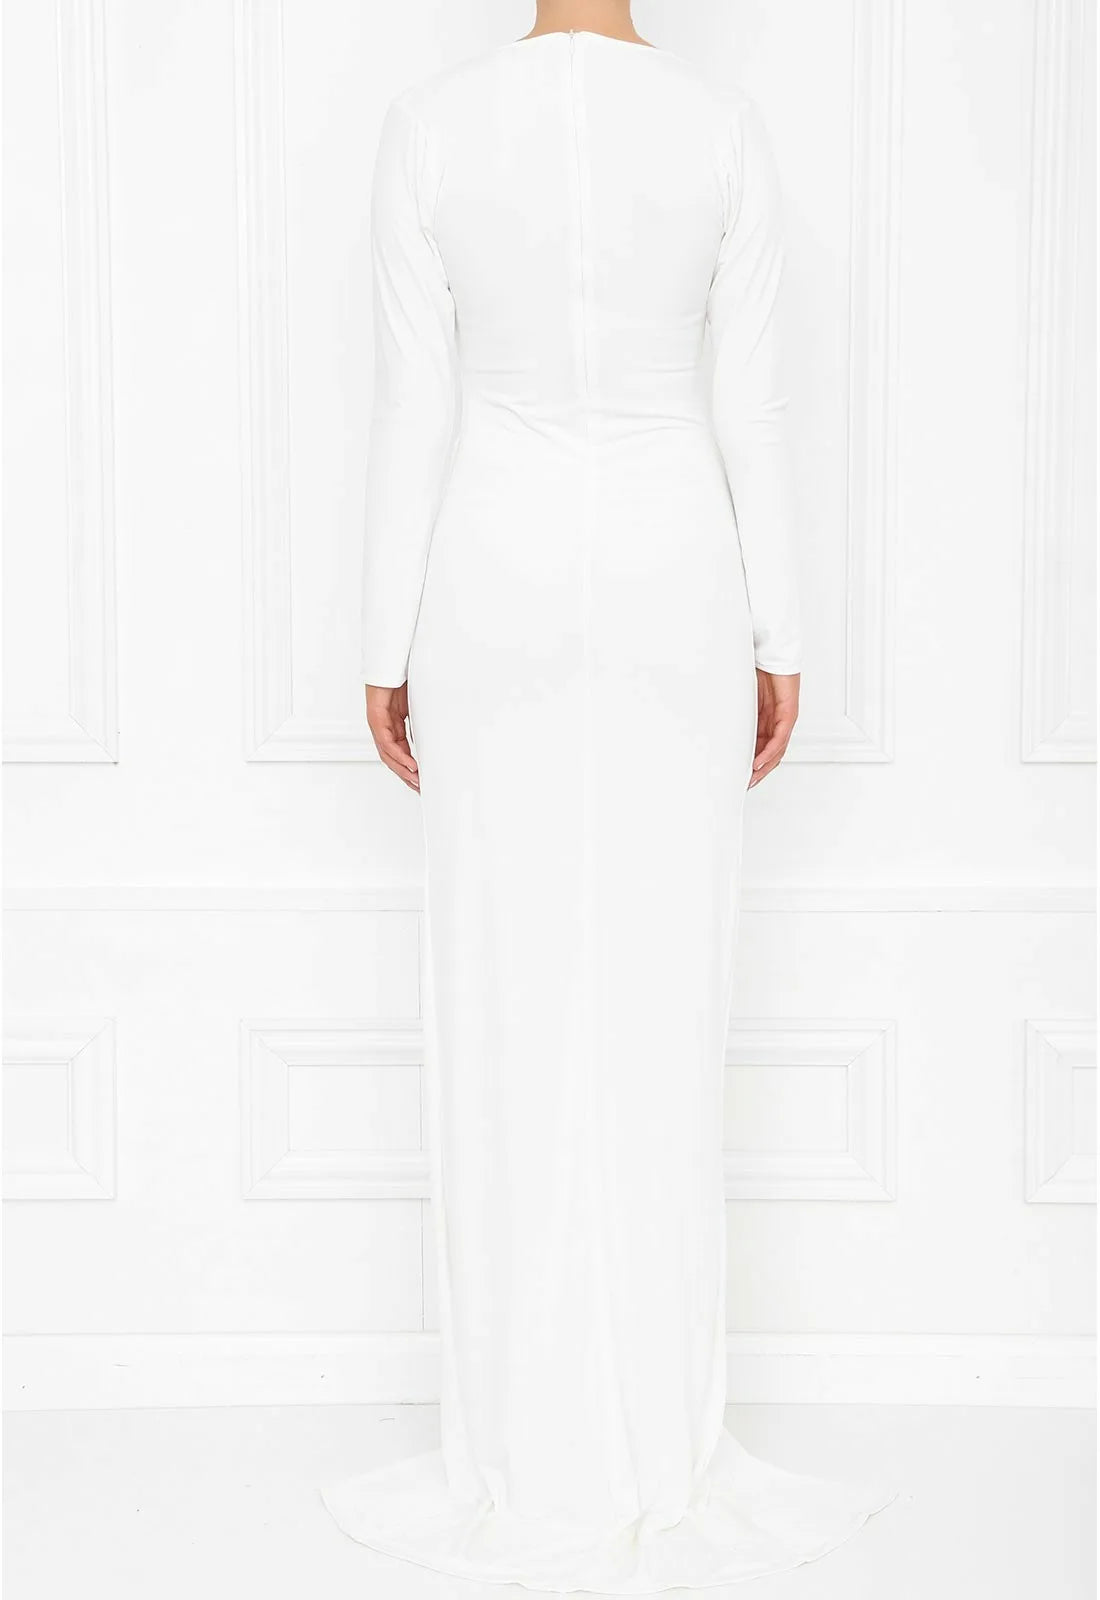 Honor Gold Jessica Long Sleeve Maxi Dress in White-23904